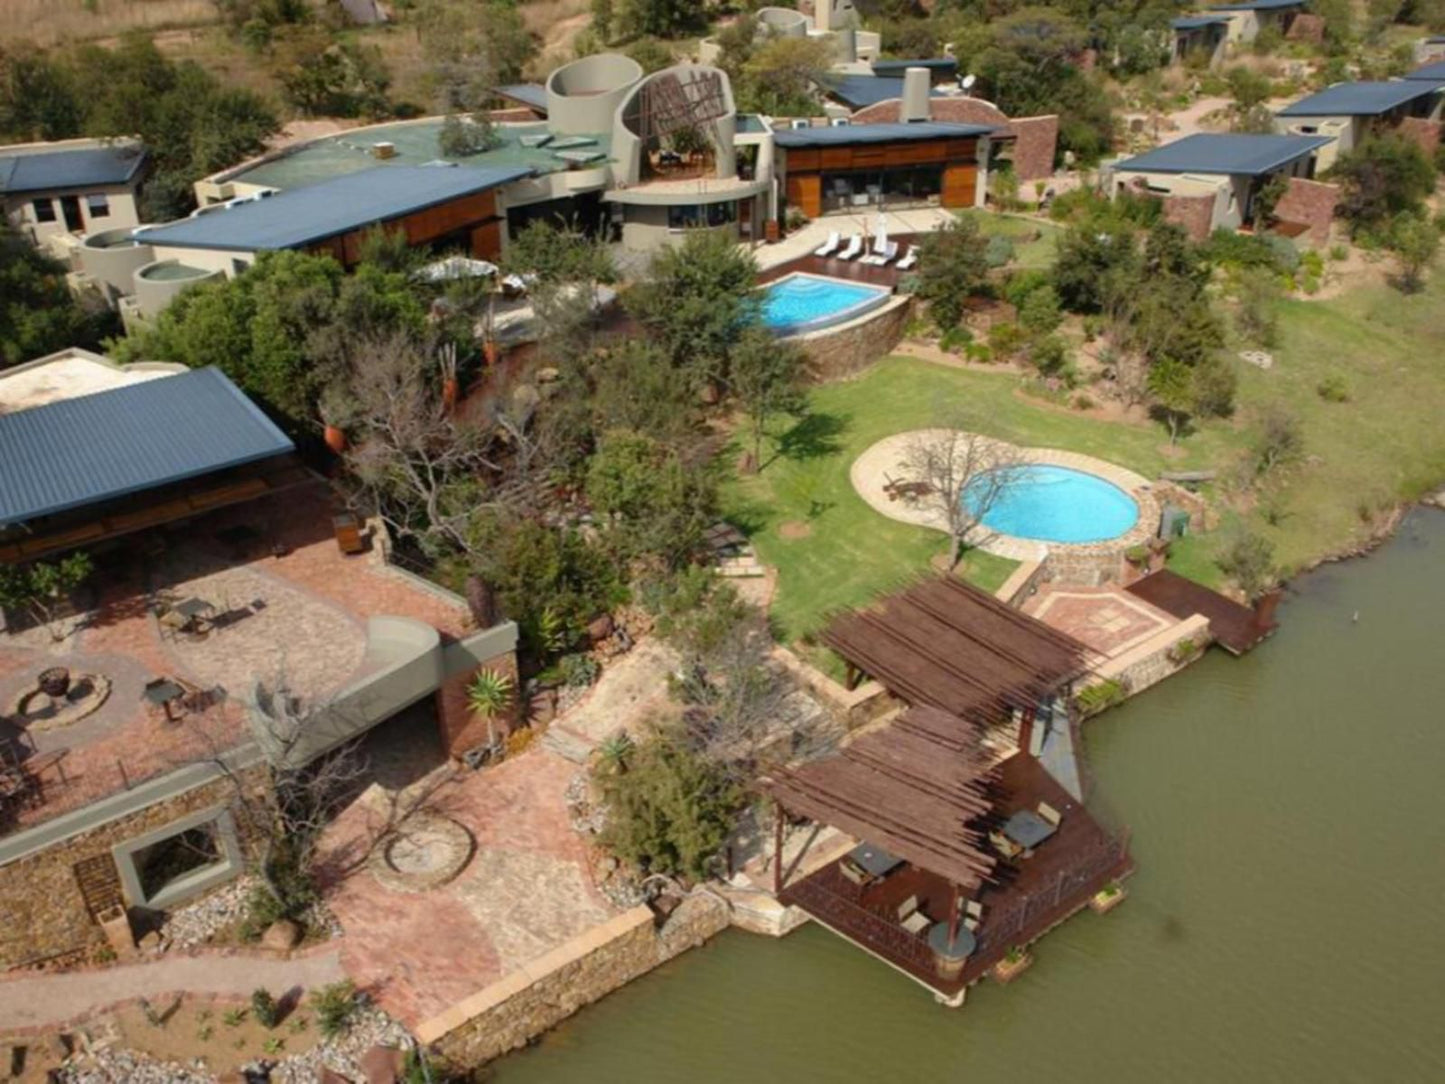 Silver Streams Modimolle Modimolle Nylstroom Limpopo Province South Africa River, Nature, Waters, Swimming Pool